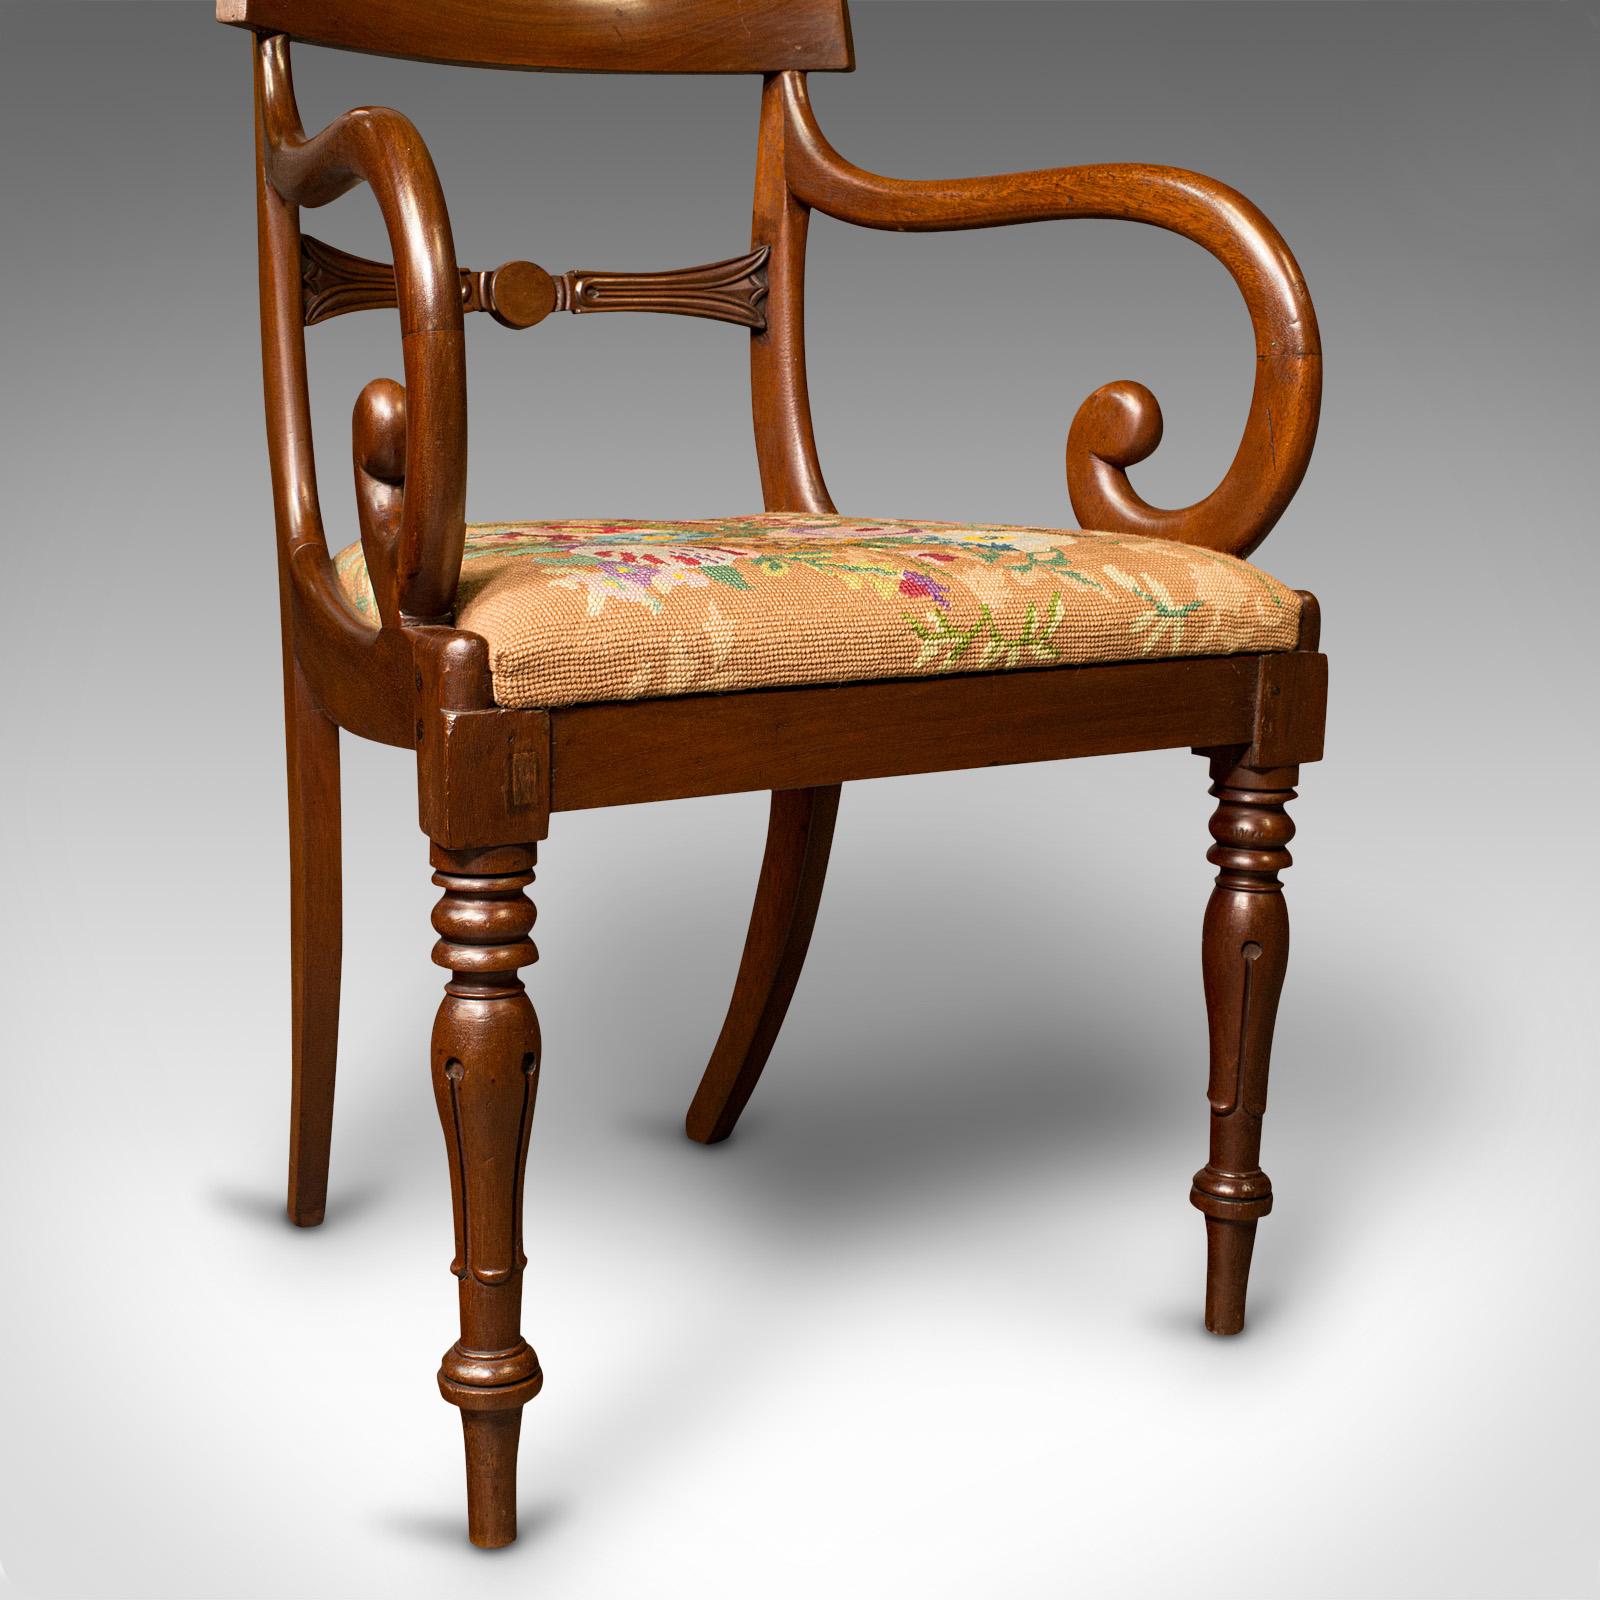 Antique Scroll Arm Chair, English, Armchair, Desk, Needlepoint, Regency, C.1830 For Sale 6